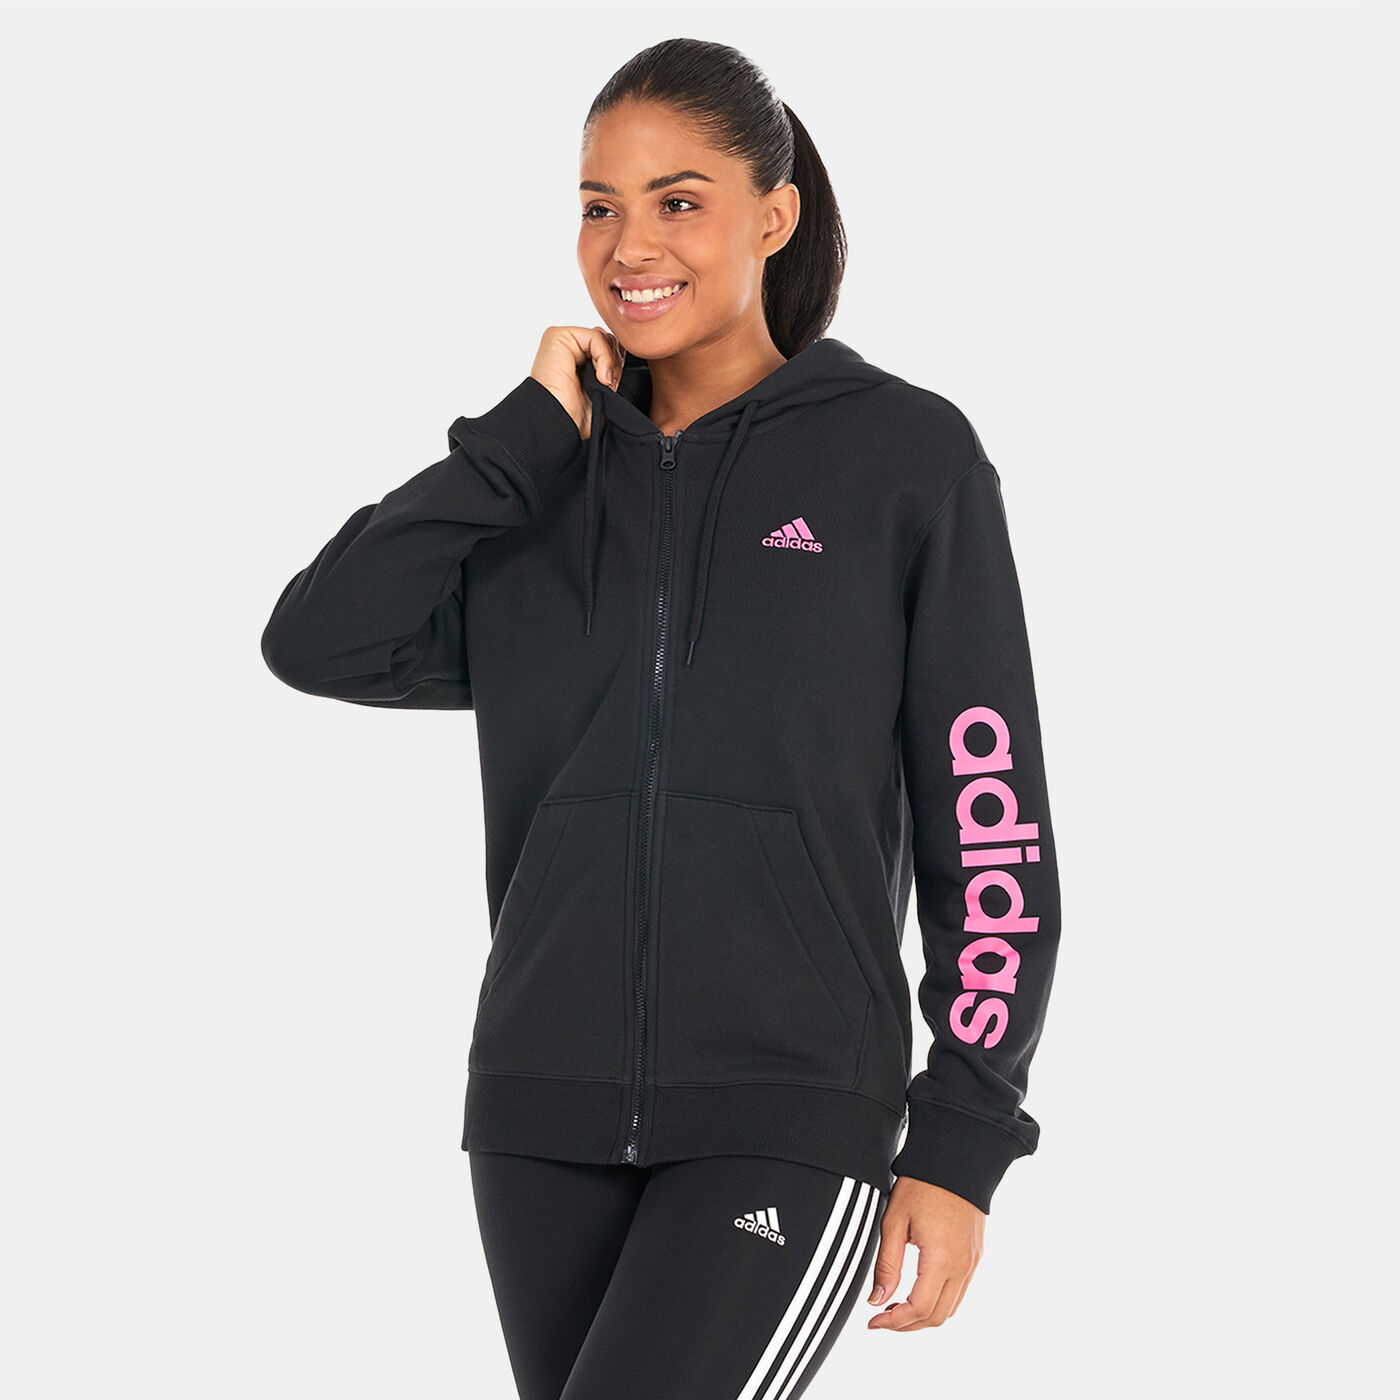 Women's Essentials Linear Full-Zip French Terry Hoodie